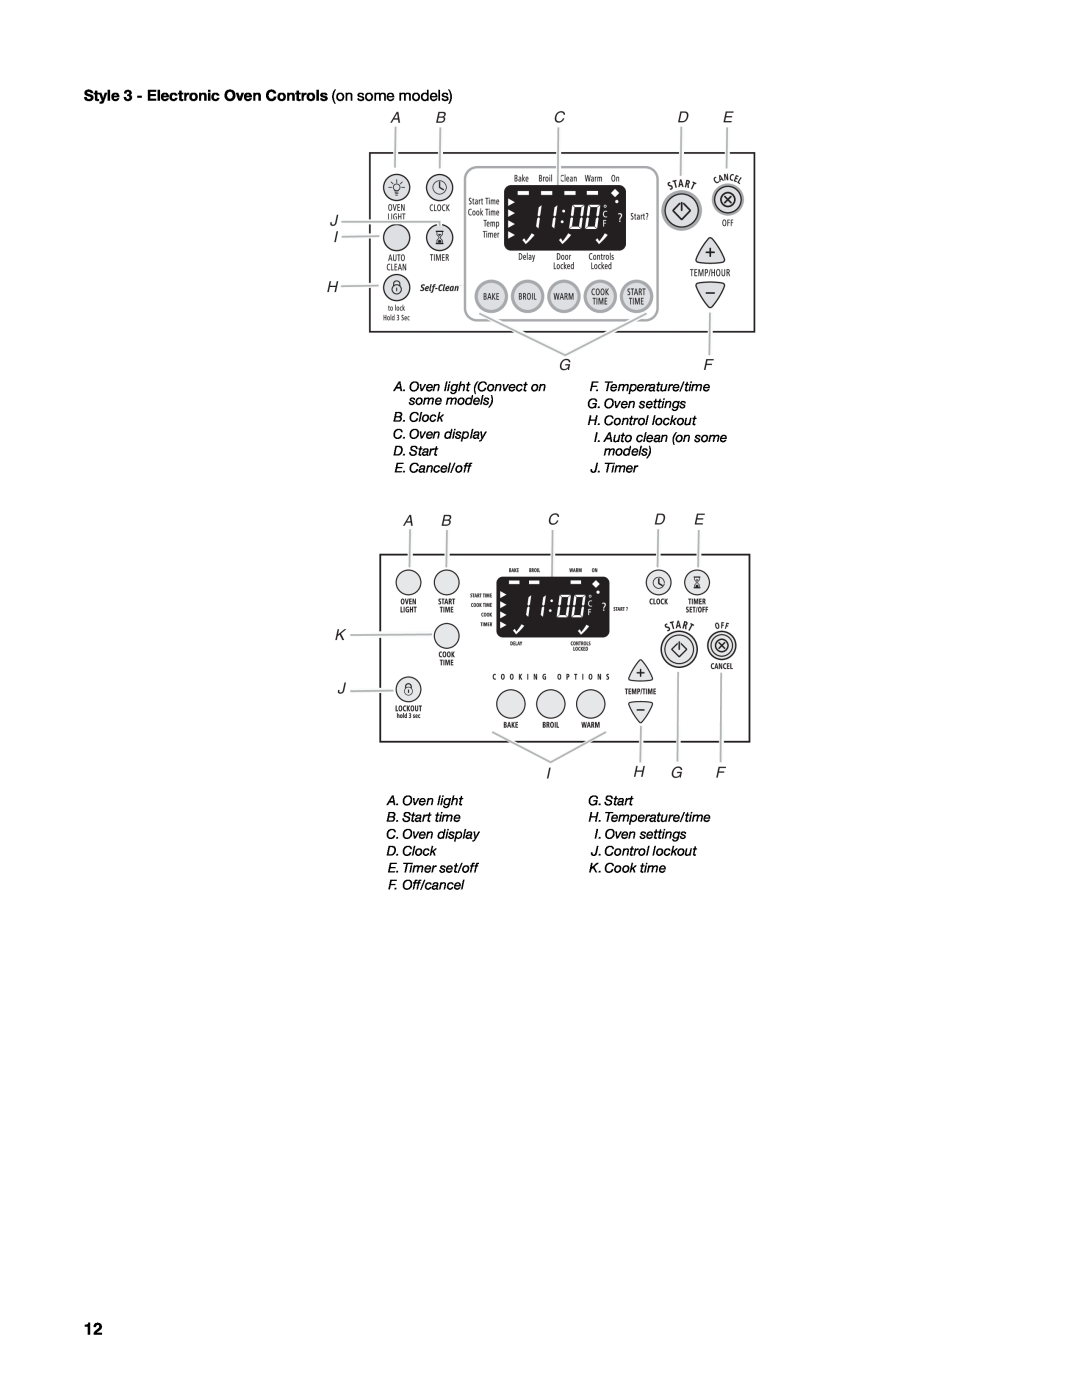 Whirlpool GR773LXS manual A Bcd E J I H, Style 3 - Electronic Oven Controls on some models 